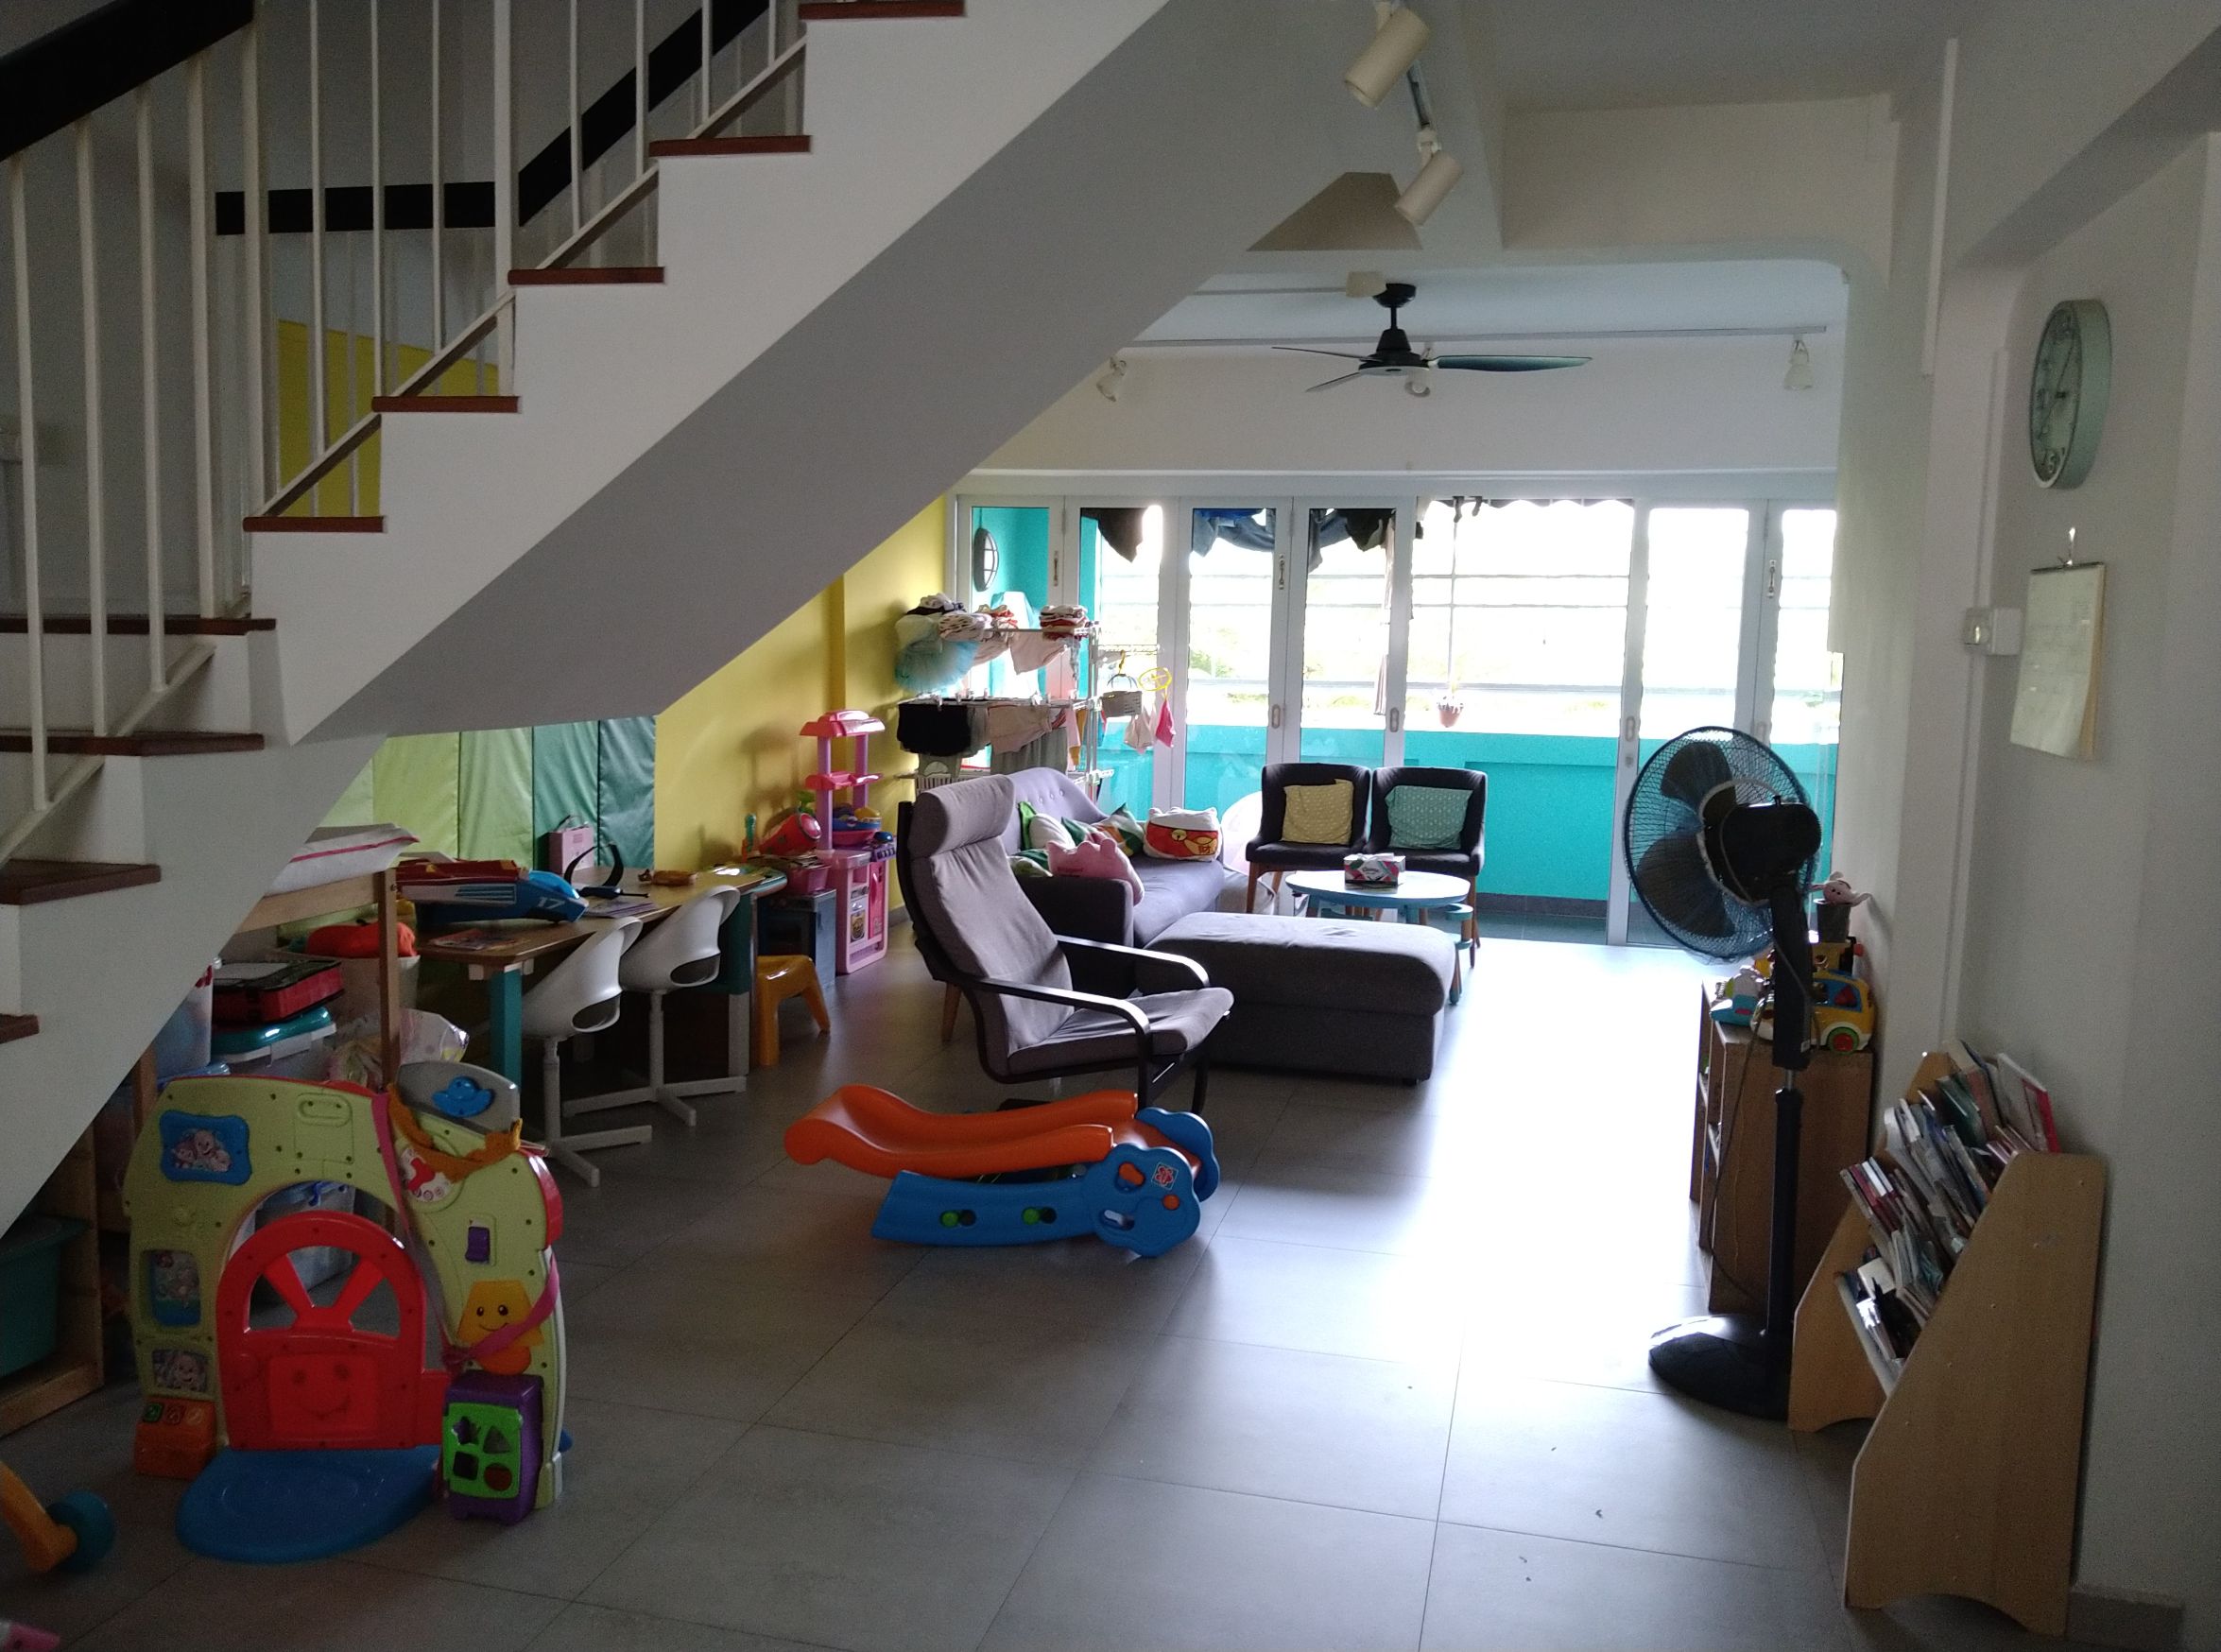 We Moved To A 38-Year-Old Executive Maisonette: Here’s What It’s Like To Stay In An Old EM In Jurong West